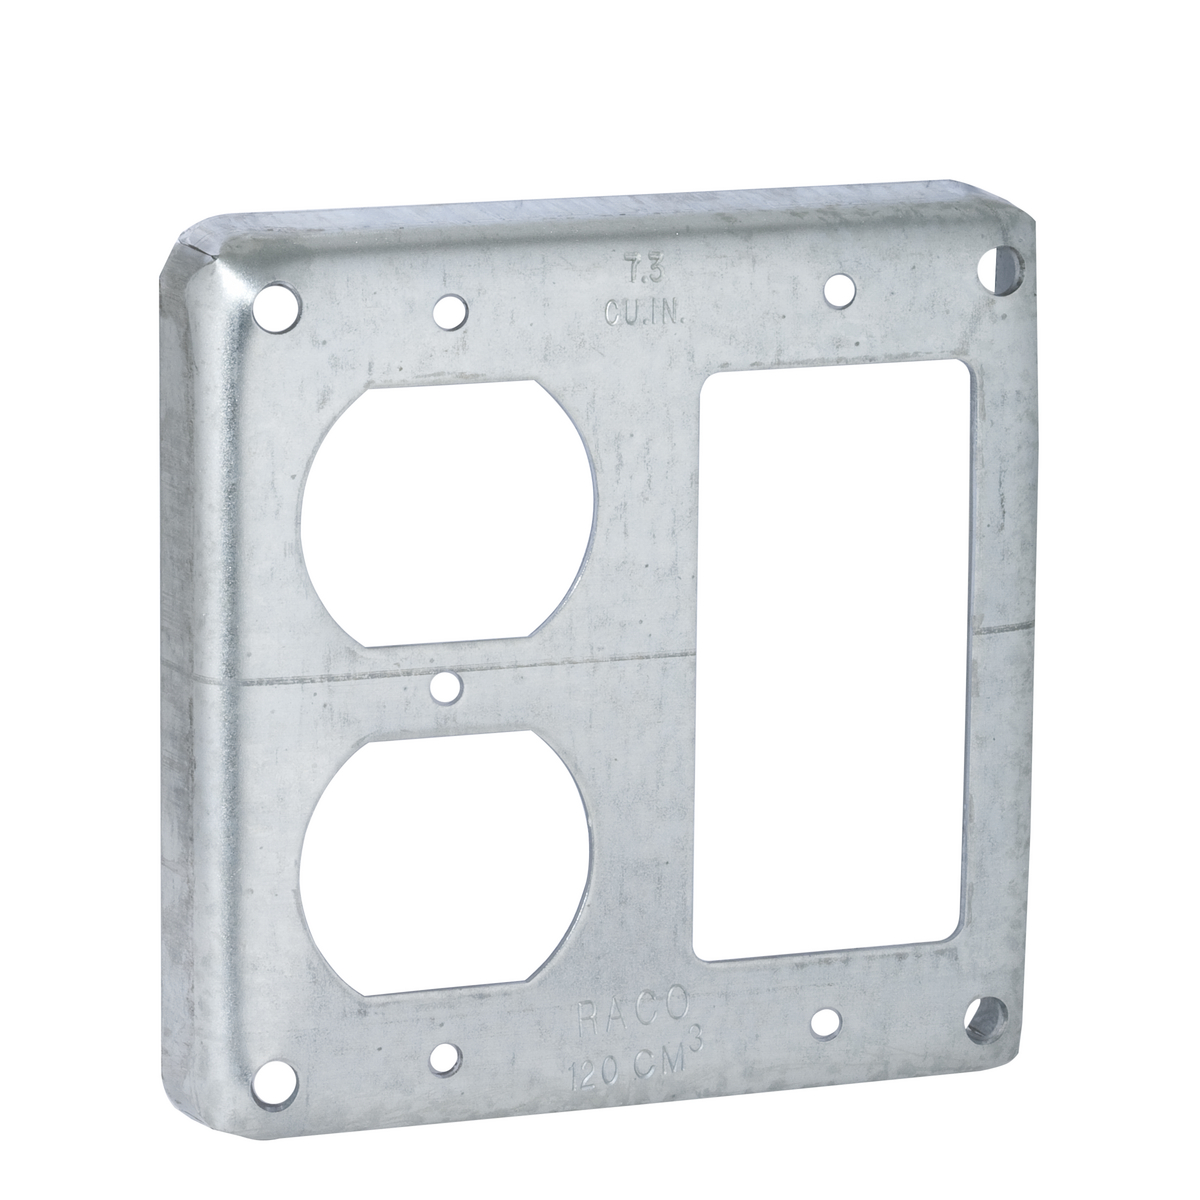 4 In. Square Non-Crushed Corner Covers - Raised 1/2 In., 1 GFCI and 1Duplex Receptacle